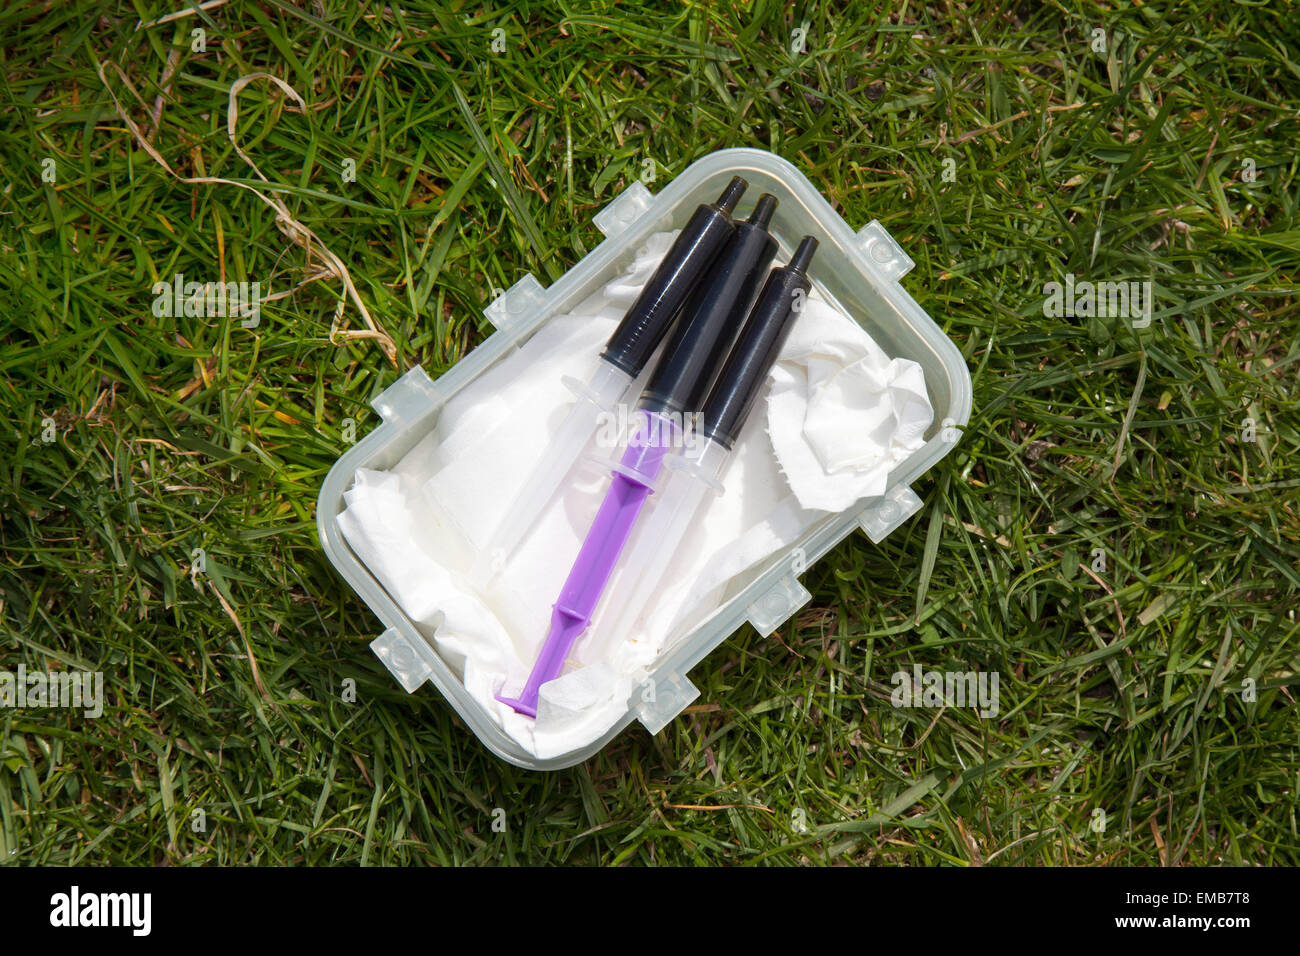 Manchester, UK 19th April, 2015. 'Simpson oil ' held by certain Cannabis festival-goers at Platt Fields Park. This ‘420’ event is advertised as a mini-festival for people, weed smokers, who support the legalisation of cannabis. Police officers warned they would take a dim view of anyone taking drugs at this year’s Puff-Puff-Pass Day event. Greater Manchester Police and have had to issue a number of verbal warnings to people doing so. Stock Photo